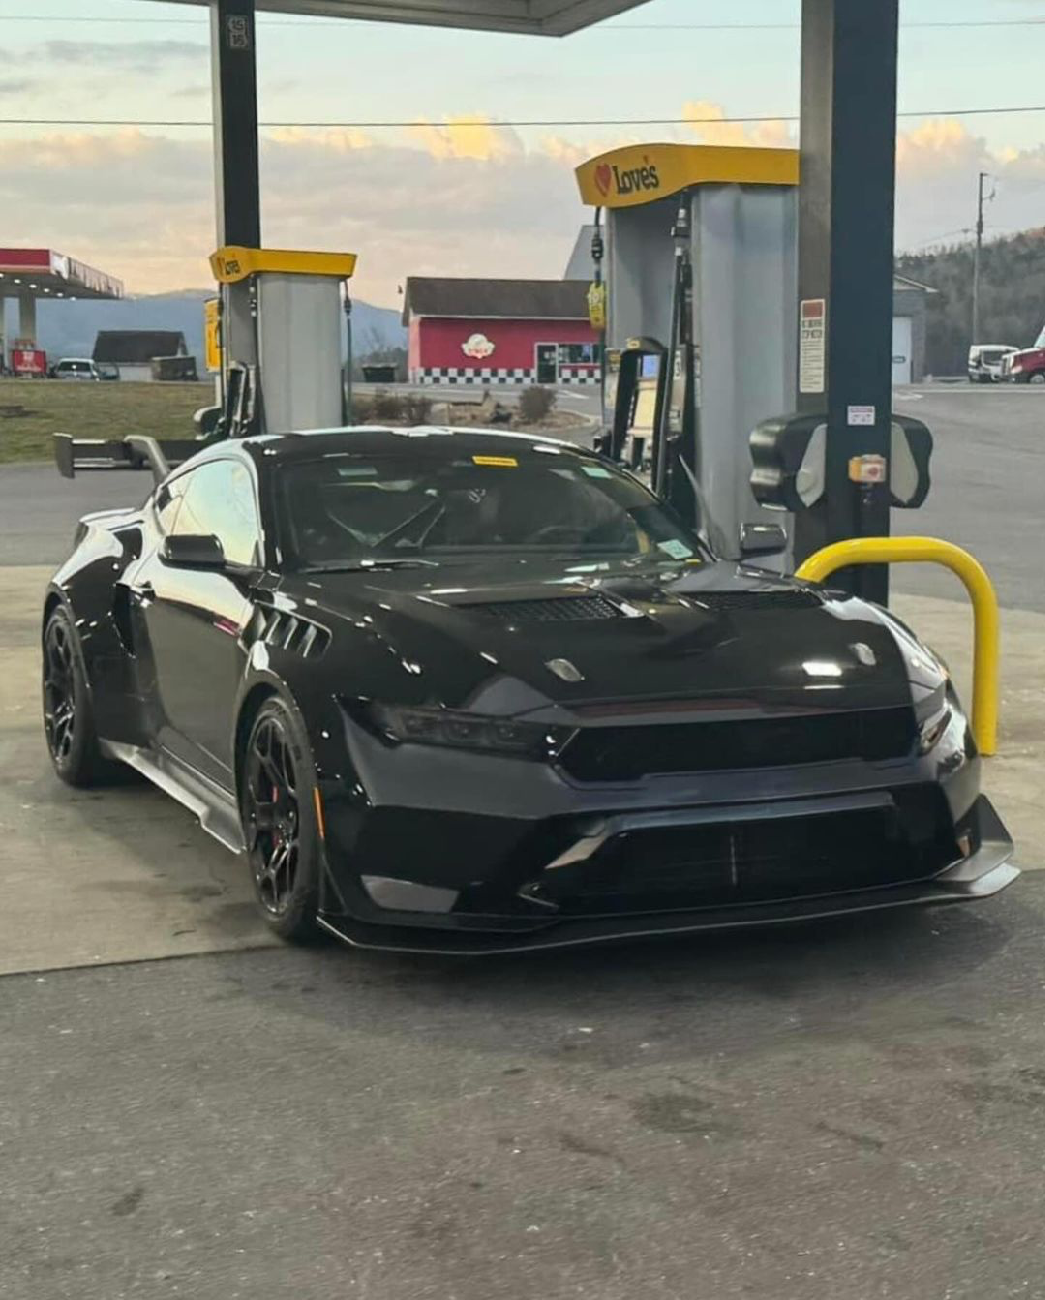 S650 Mustang Black Mustang GTD Spied at Public Gas Station mustang-gtd-spied-gas-station-2